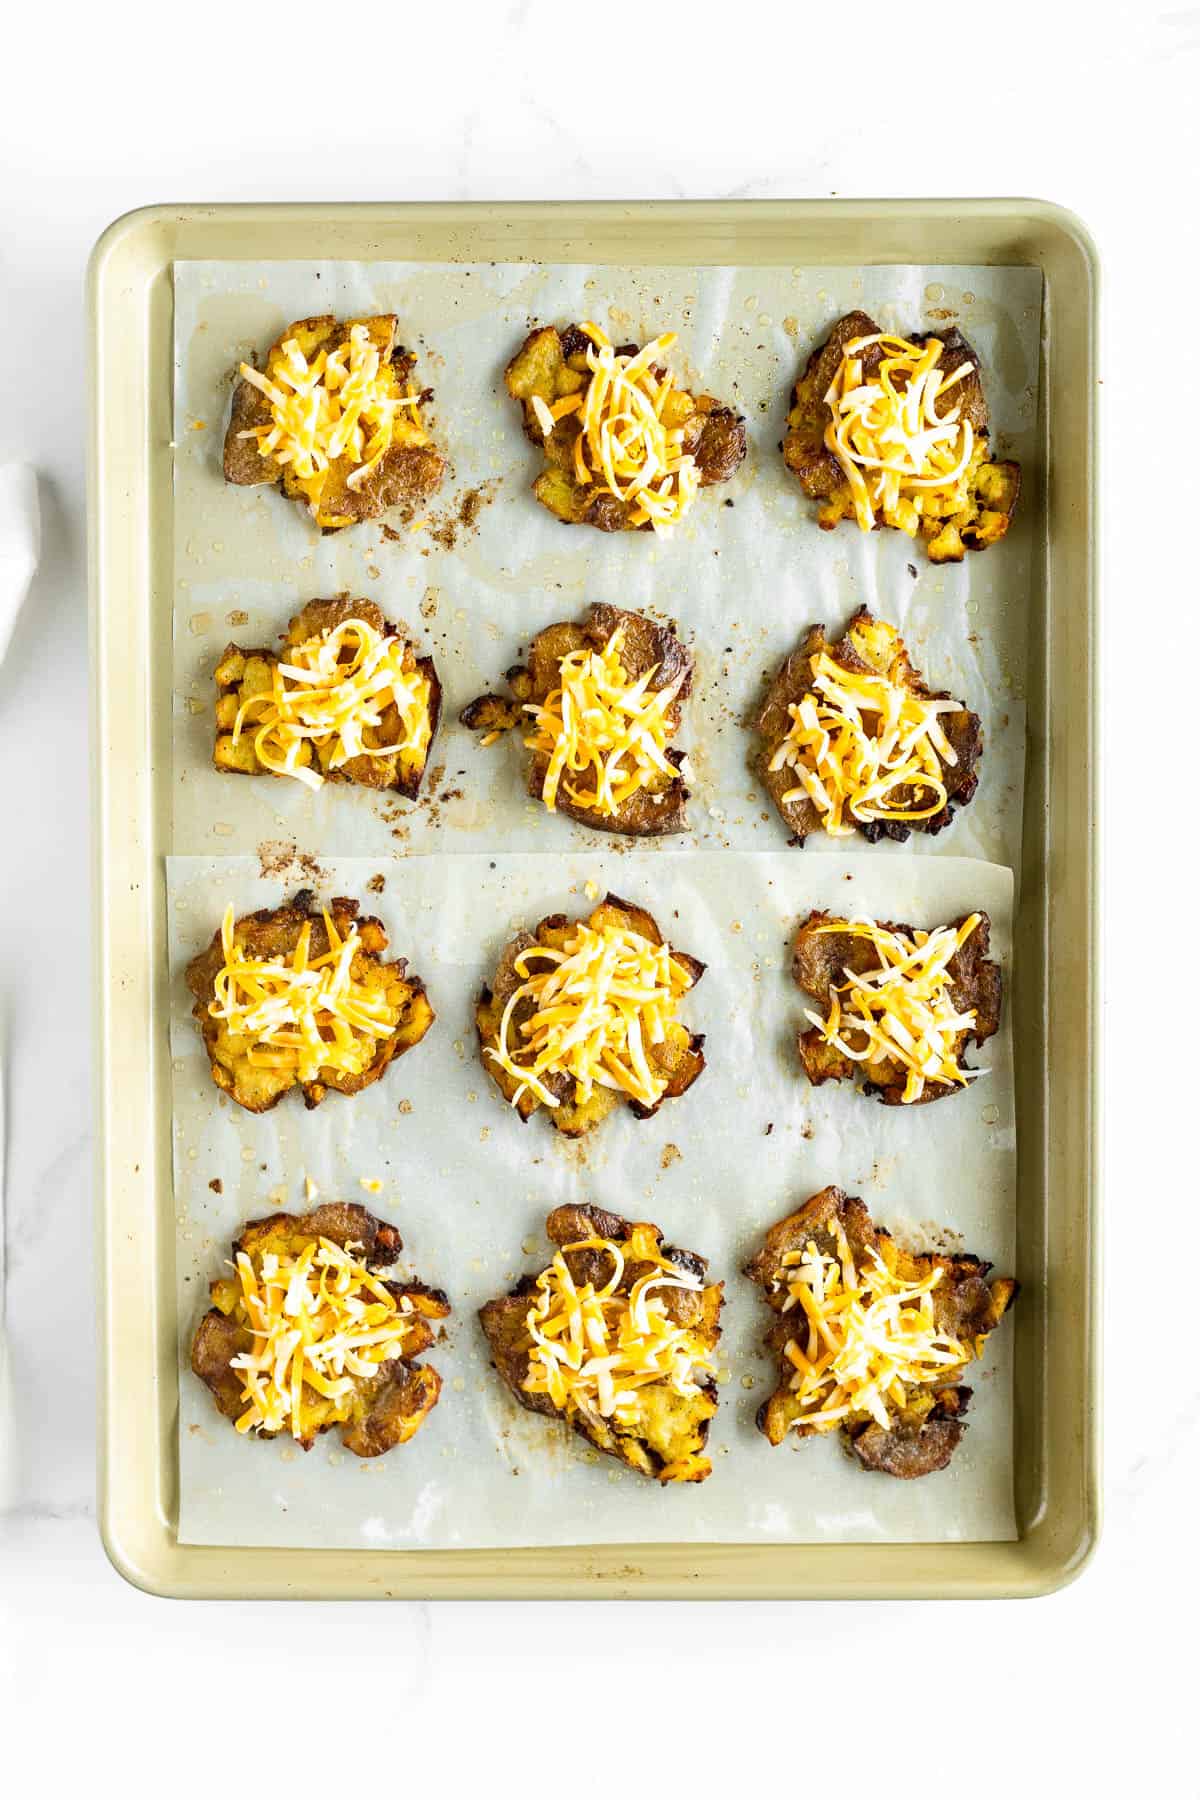 Cheese added to baked smashed potatoes.